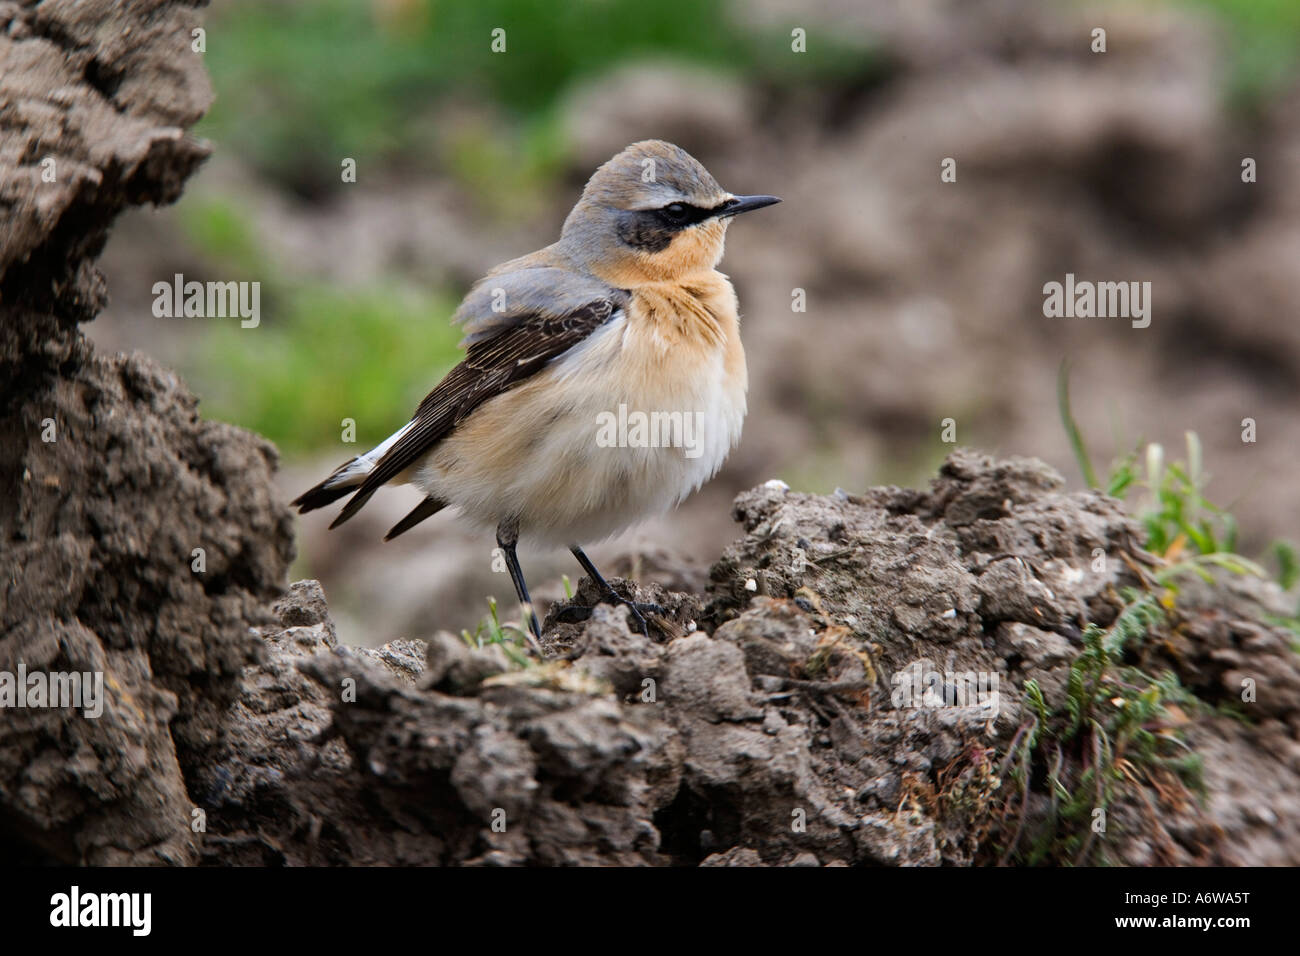 Wheatear Oenanthe oenanthe standing looking alert with nice blurred background Ashwell Hertfordshire Stock Photo